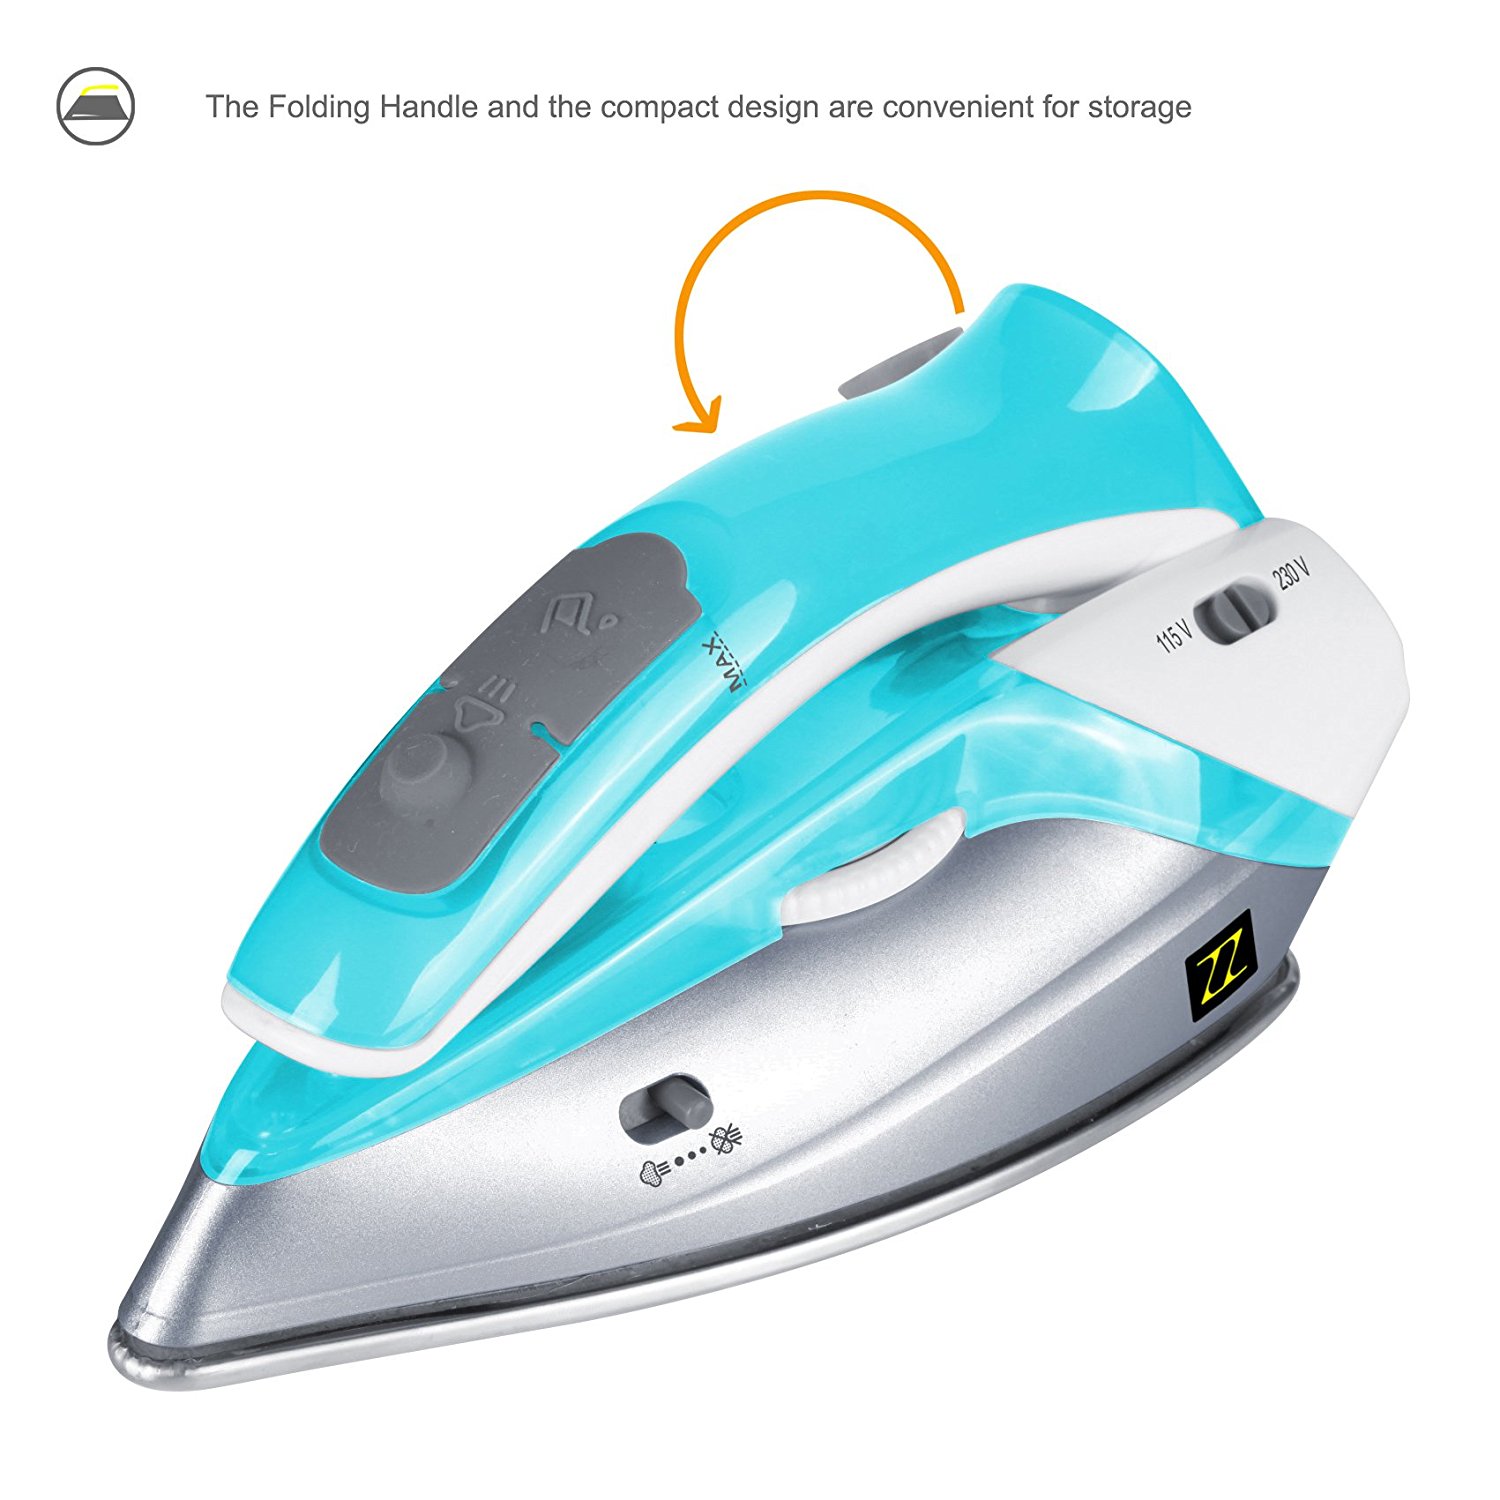 dual voltage travel iron with steam